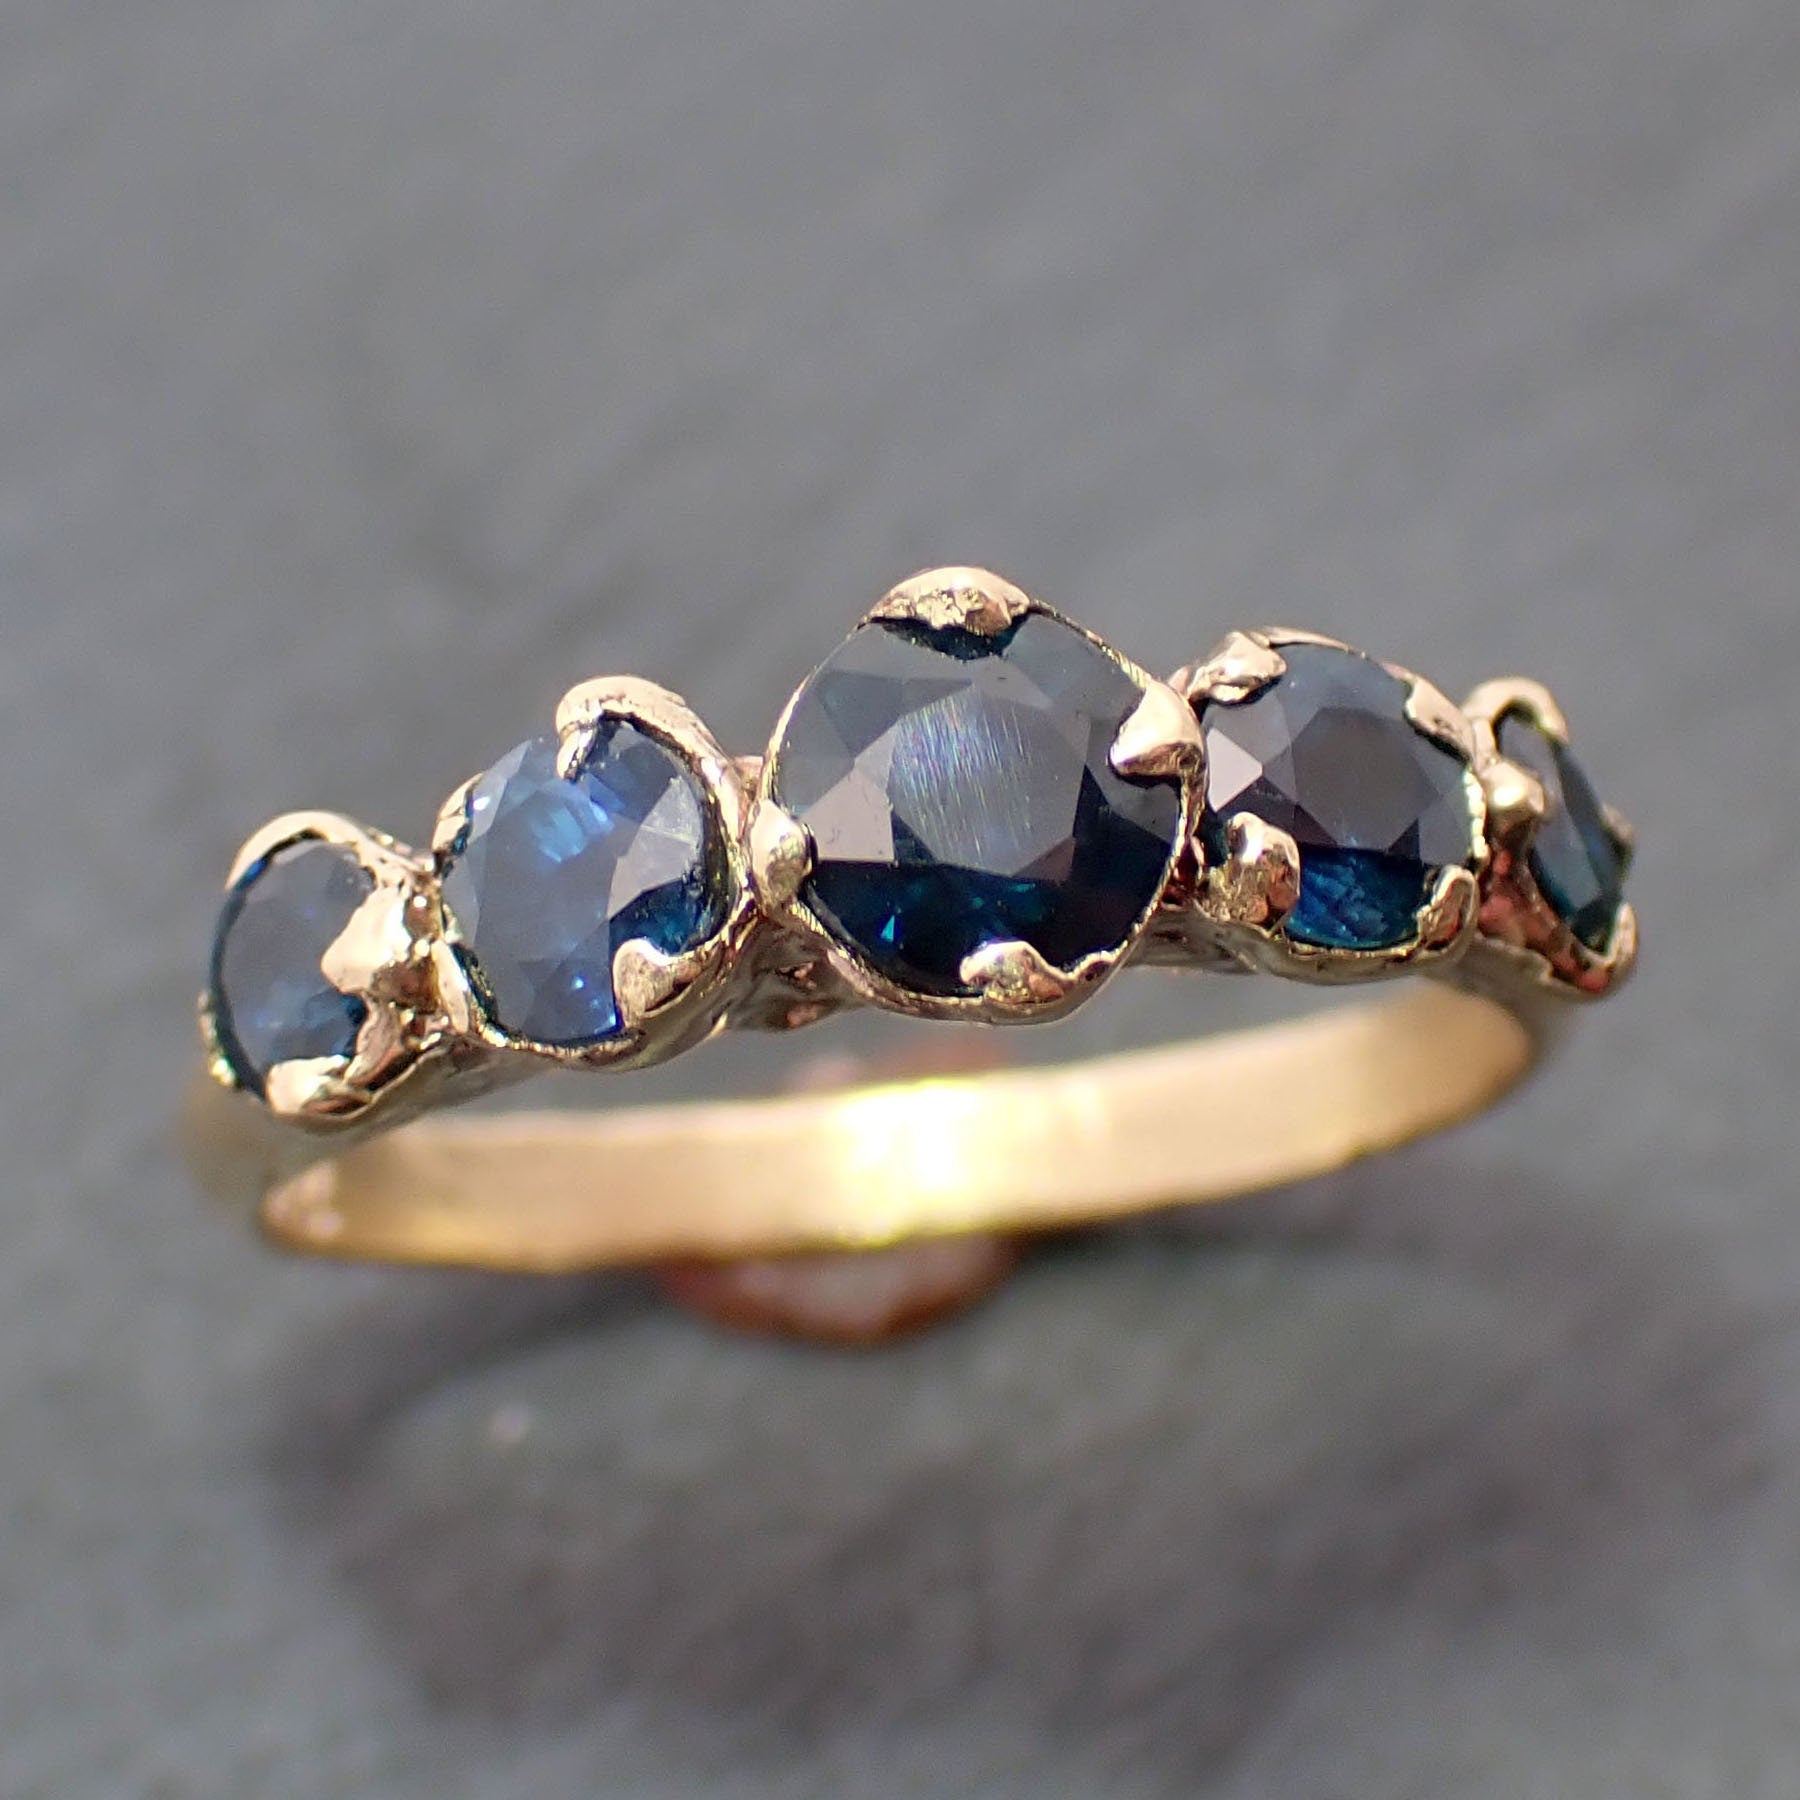 Fancy cut blue sapphire 18k Yellow Gold Engagement Wedding or Occasion Ring Gemstone Ring Multi stone Ring 3280